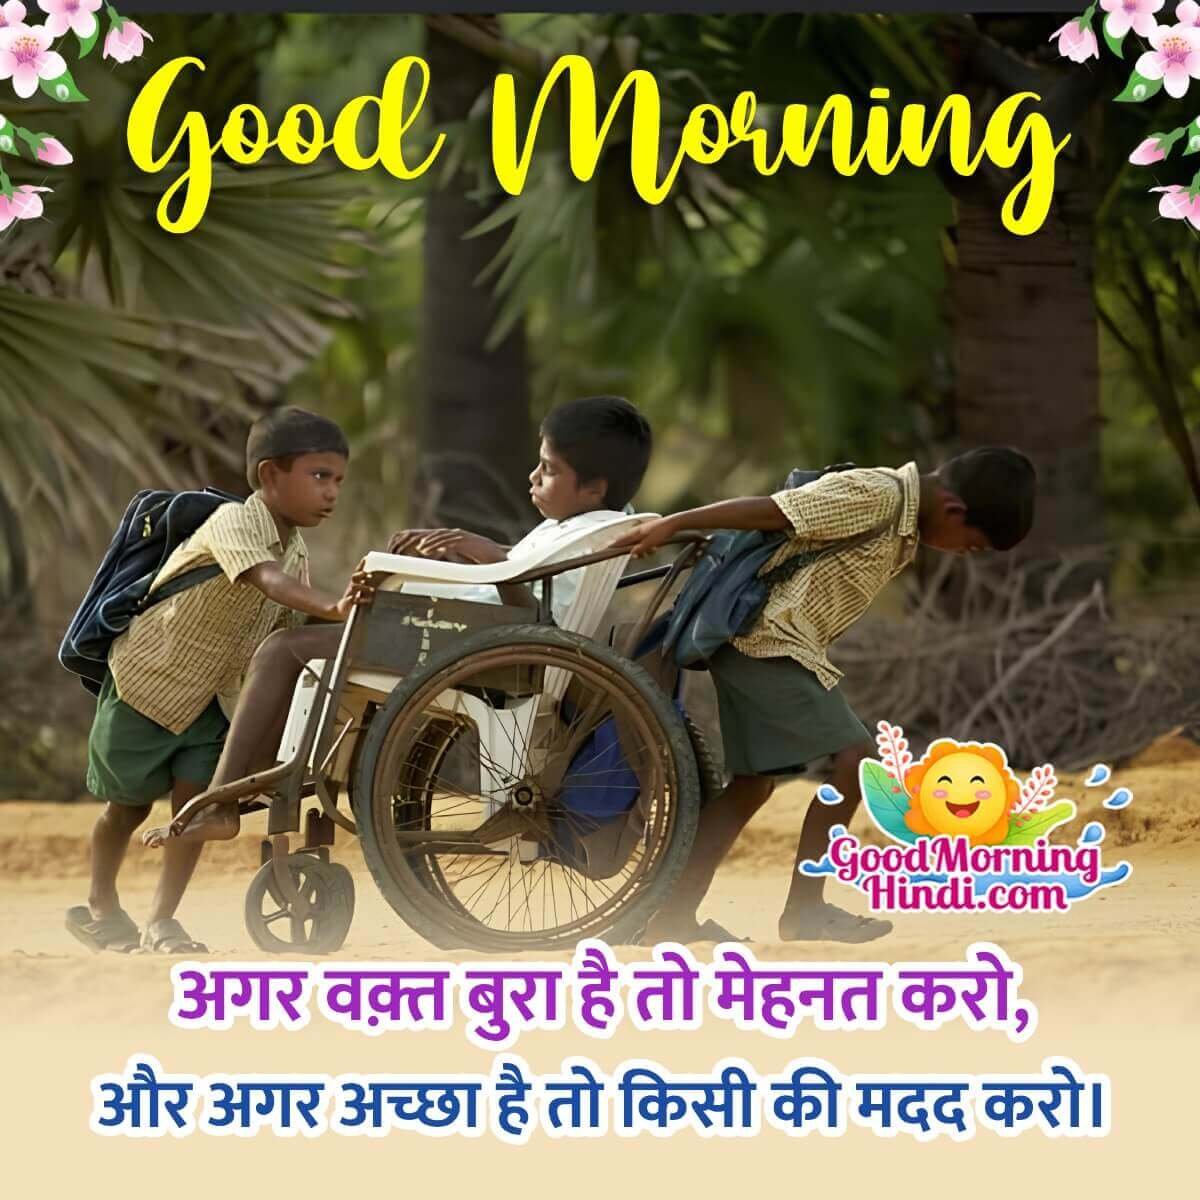 Wonderful Good Morning Hindi Thought Picture